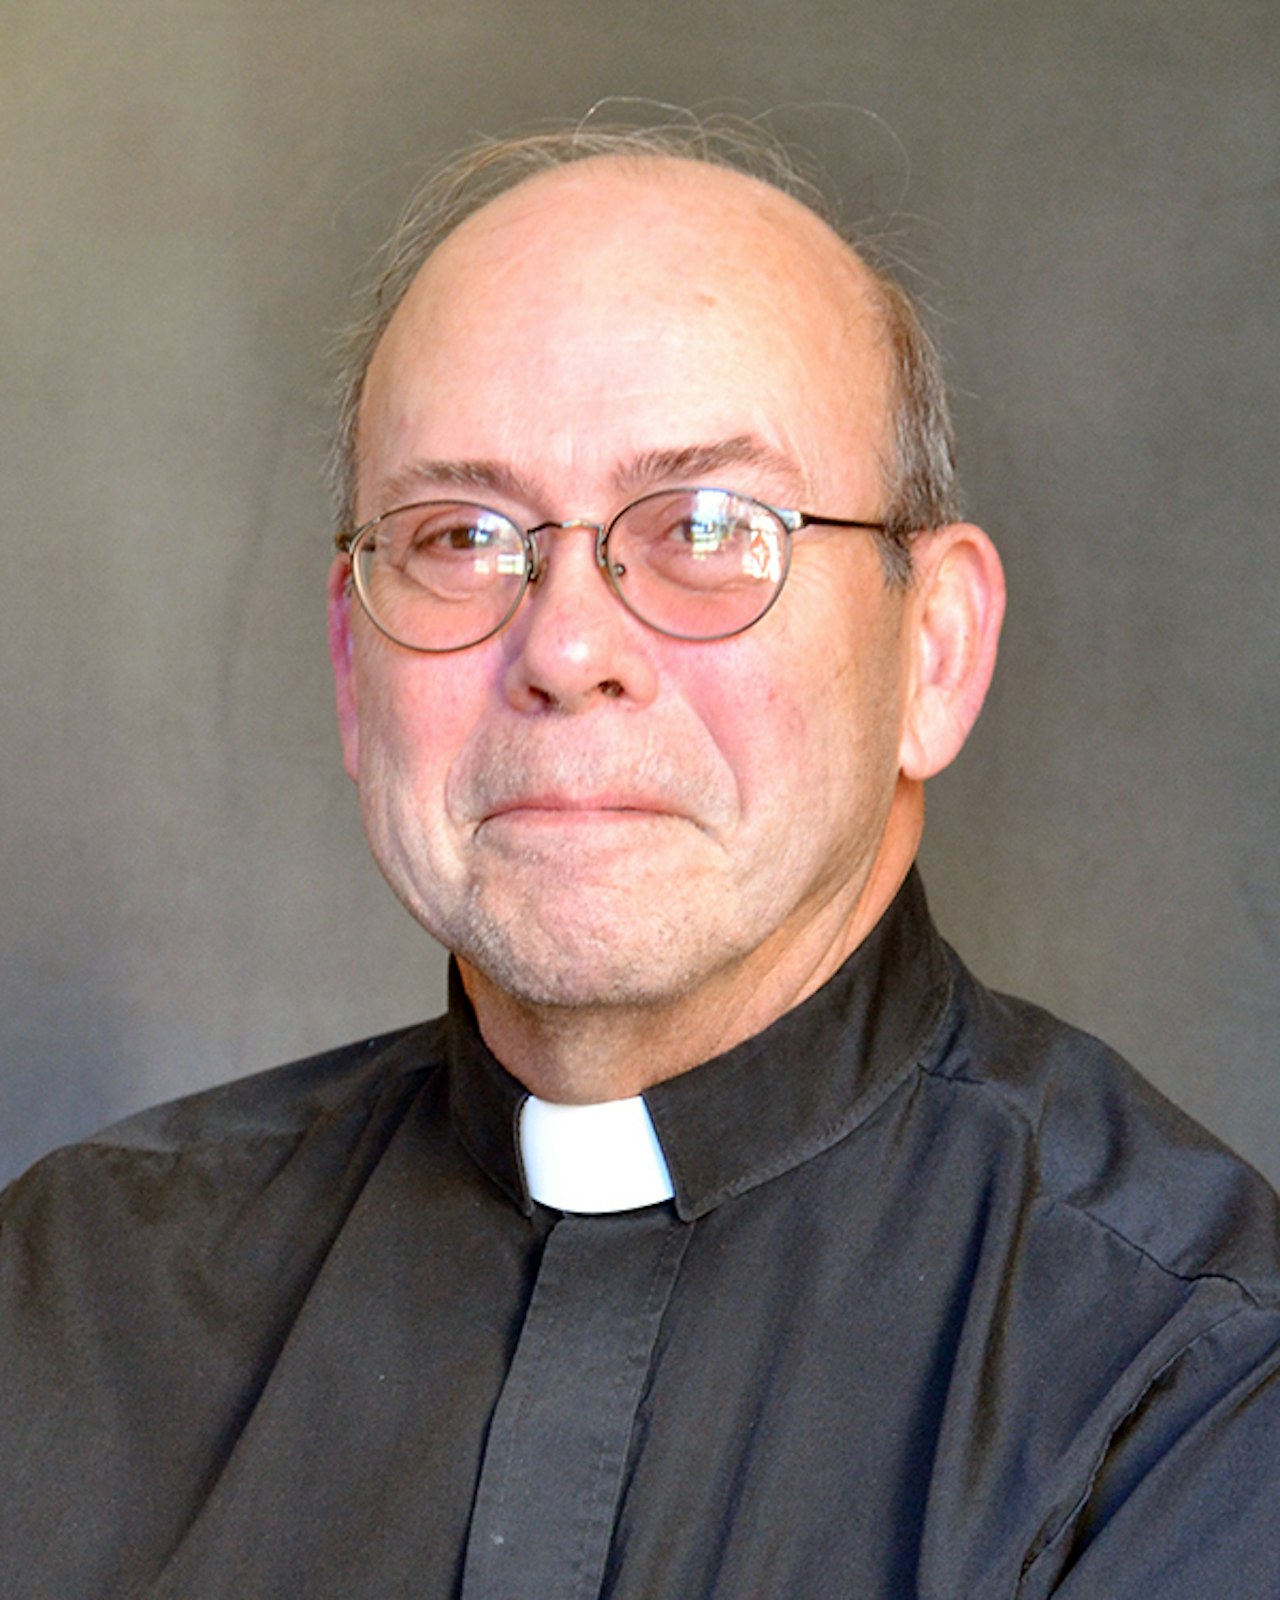 Originally ordained a priest for the Diocese of Nashville, Fr. Hurd entered the Jesuit novitiate in 1987 after teaching at St. Xavier High School in Cincinnati.